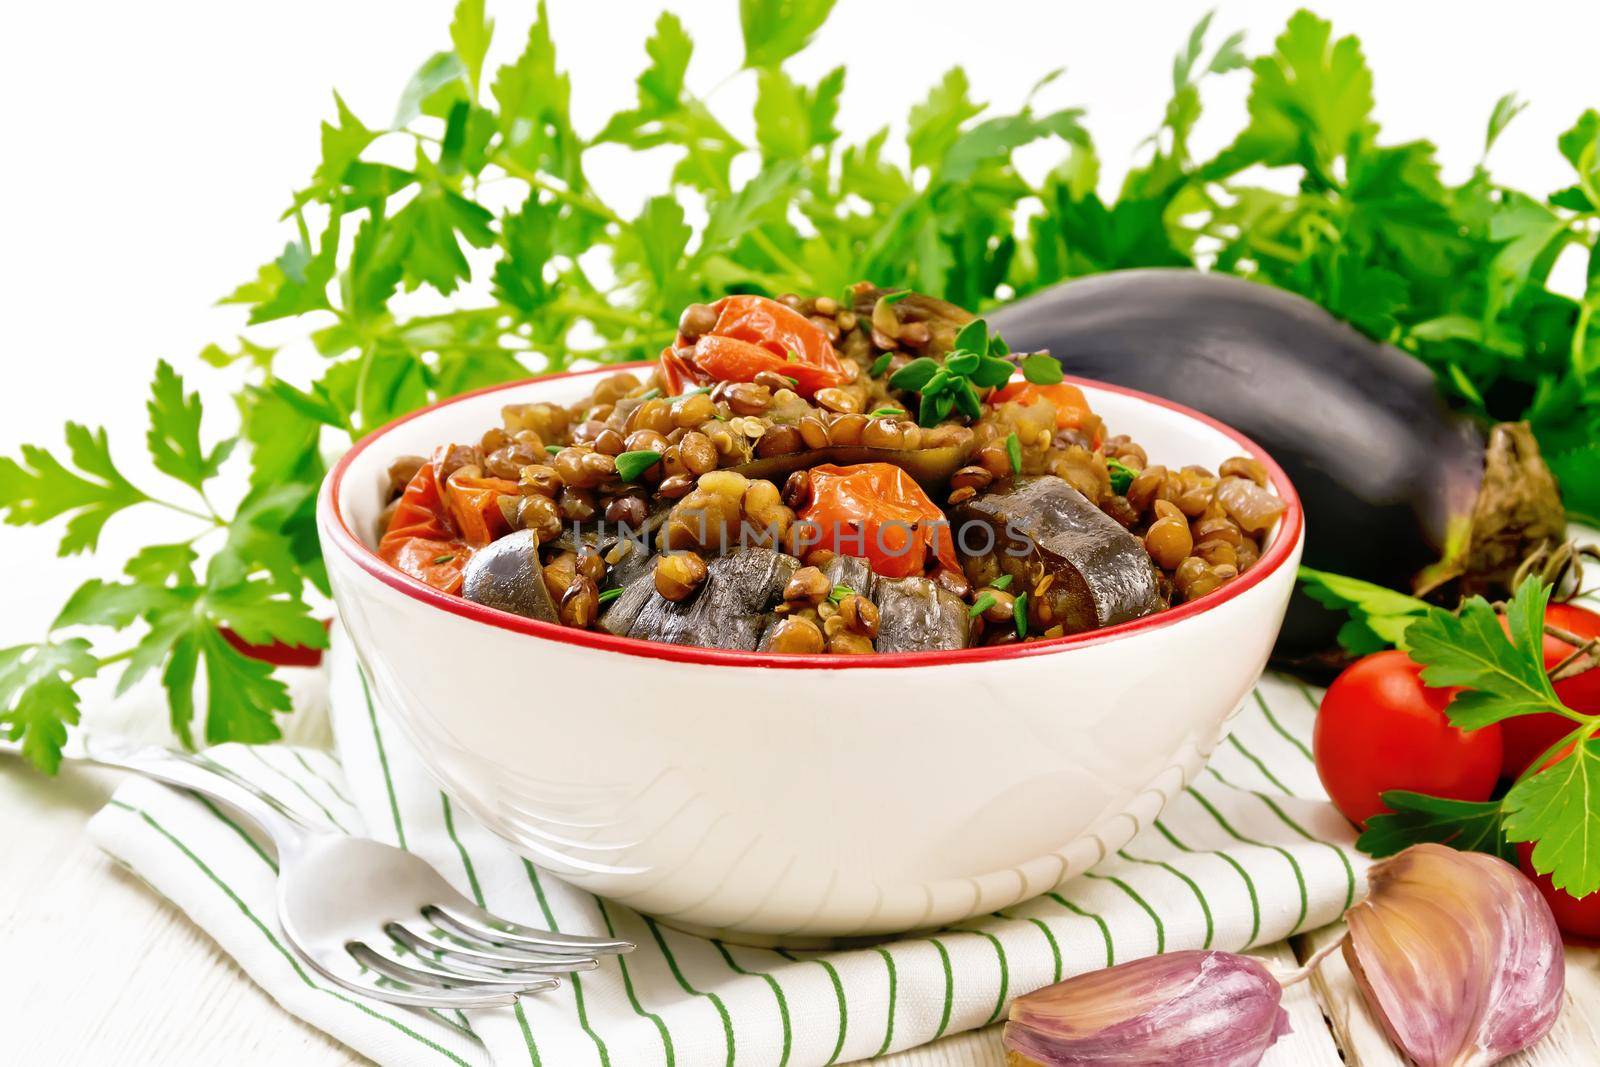 Green lentils stewed with eggplant, tomatoes, garlic and spices in a bowl on a towel, parsley on wooden board background